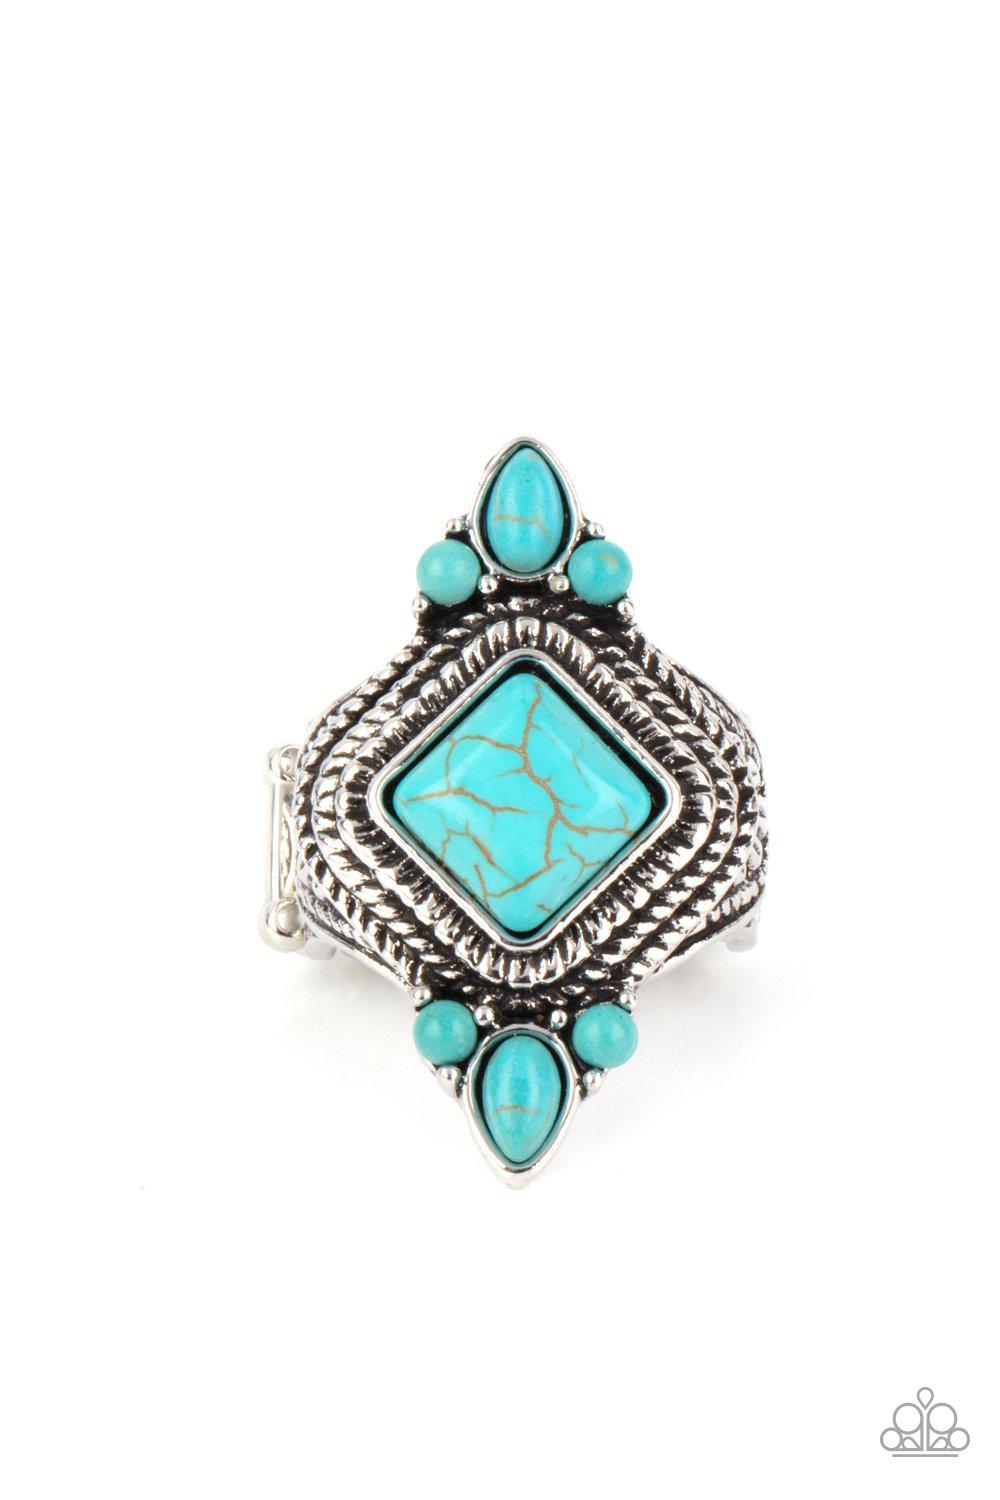 Mesa Mystic Turquoise Blue Stone Ring - Paparazzi Accessories- lightbox - CarasShop.com - $5 Jewelry by Cara Jewels